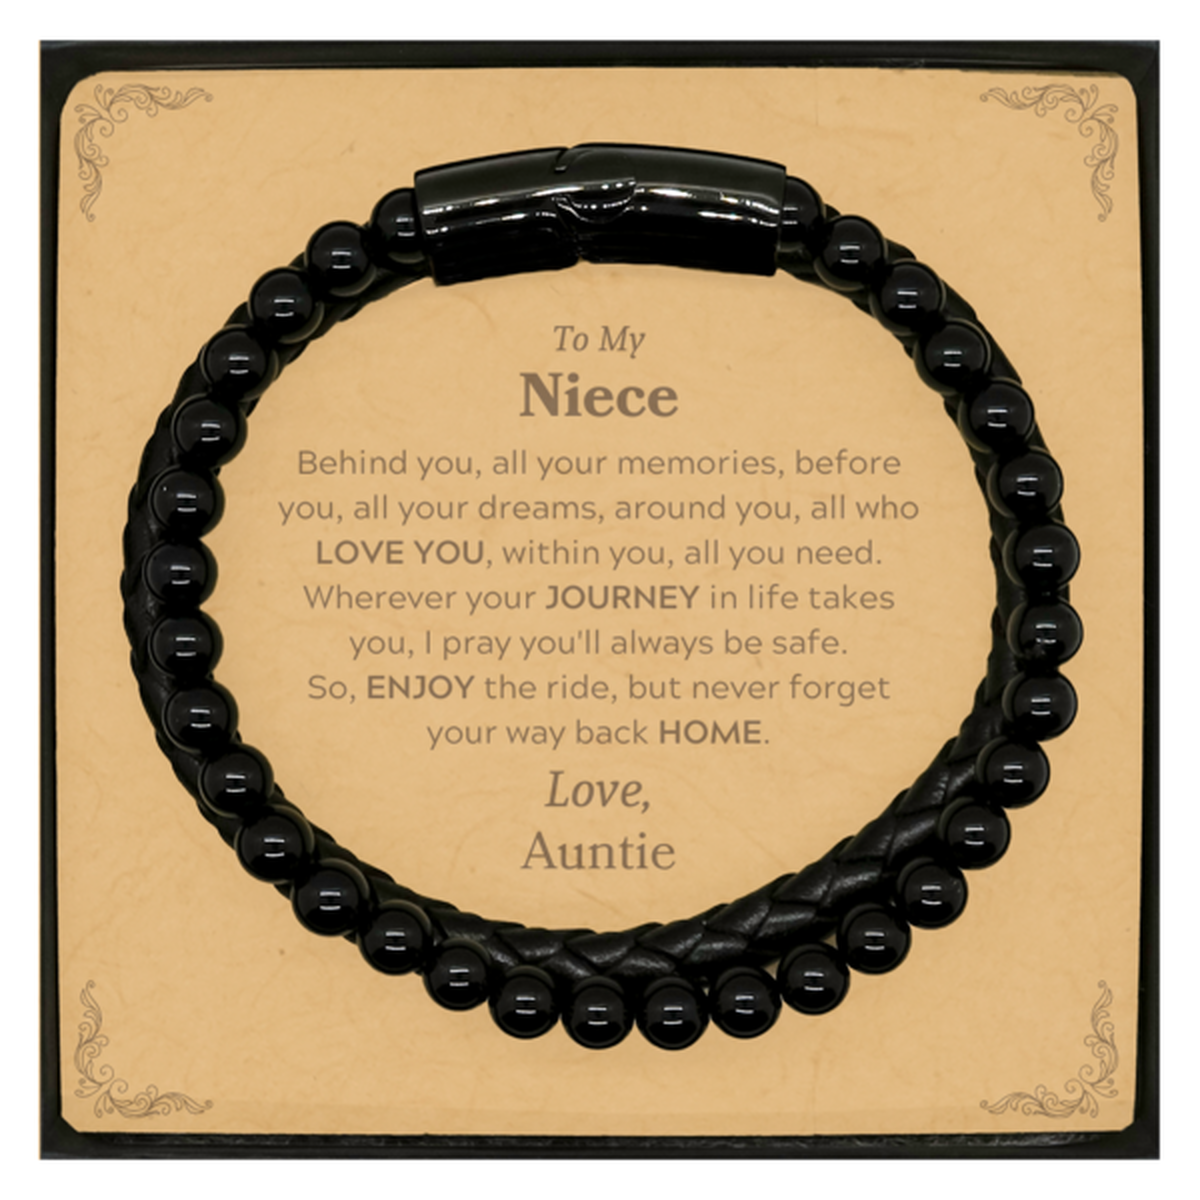 To My Niece Graduation Gifts from Auntie, Niece Stone Leather Bracelets Christmas Birthday Gifts for Niece Behind you, all your memories, before you, all your dreams. Love, Auntie